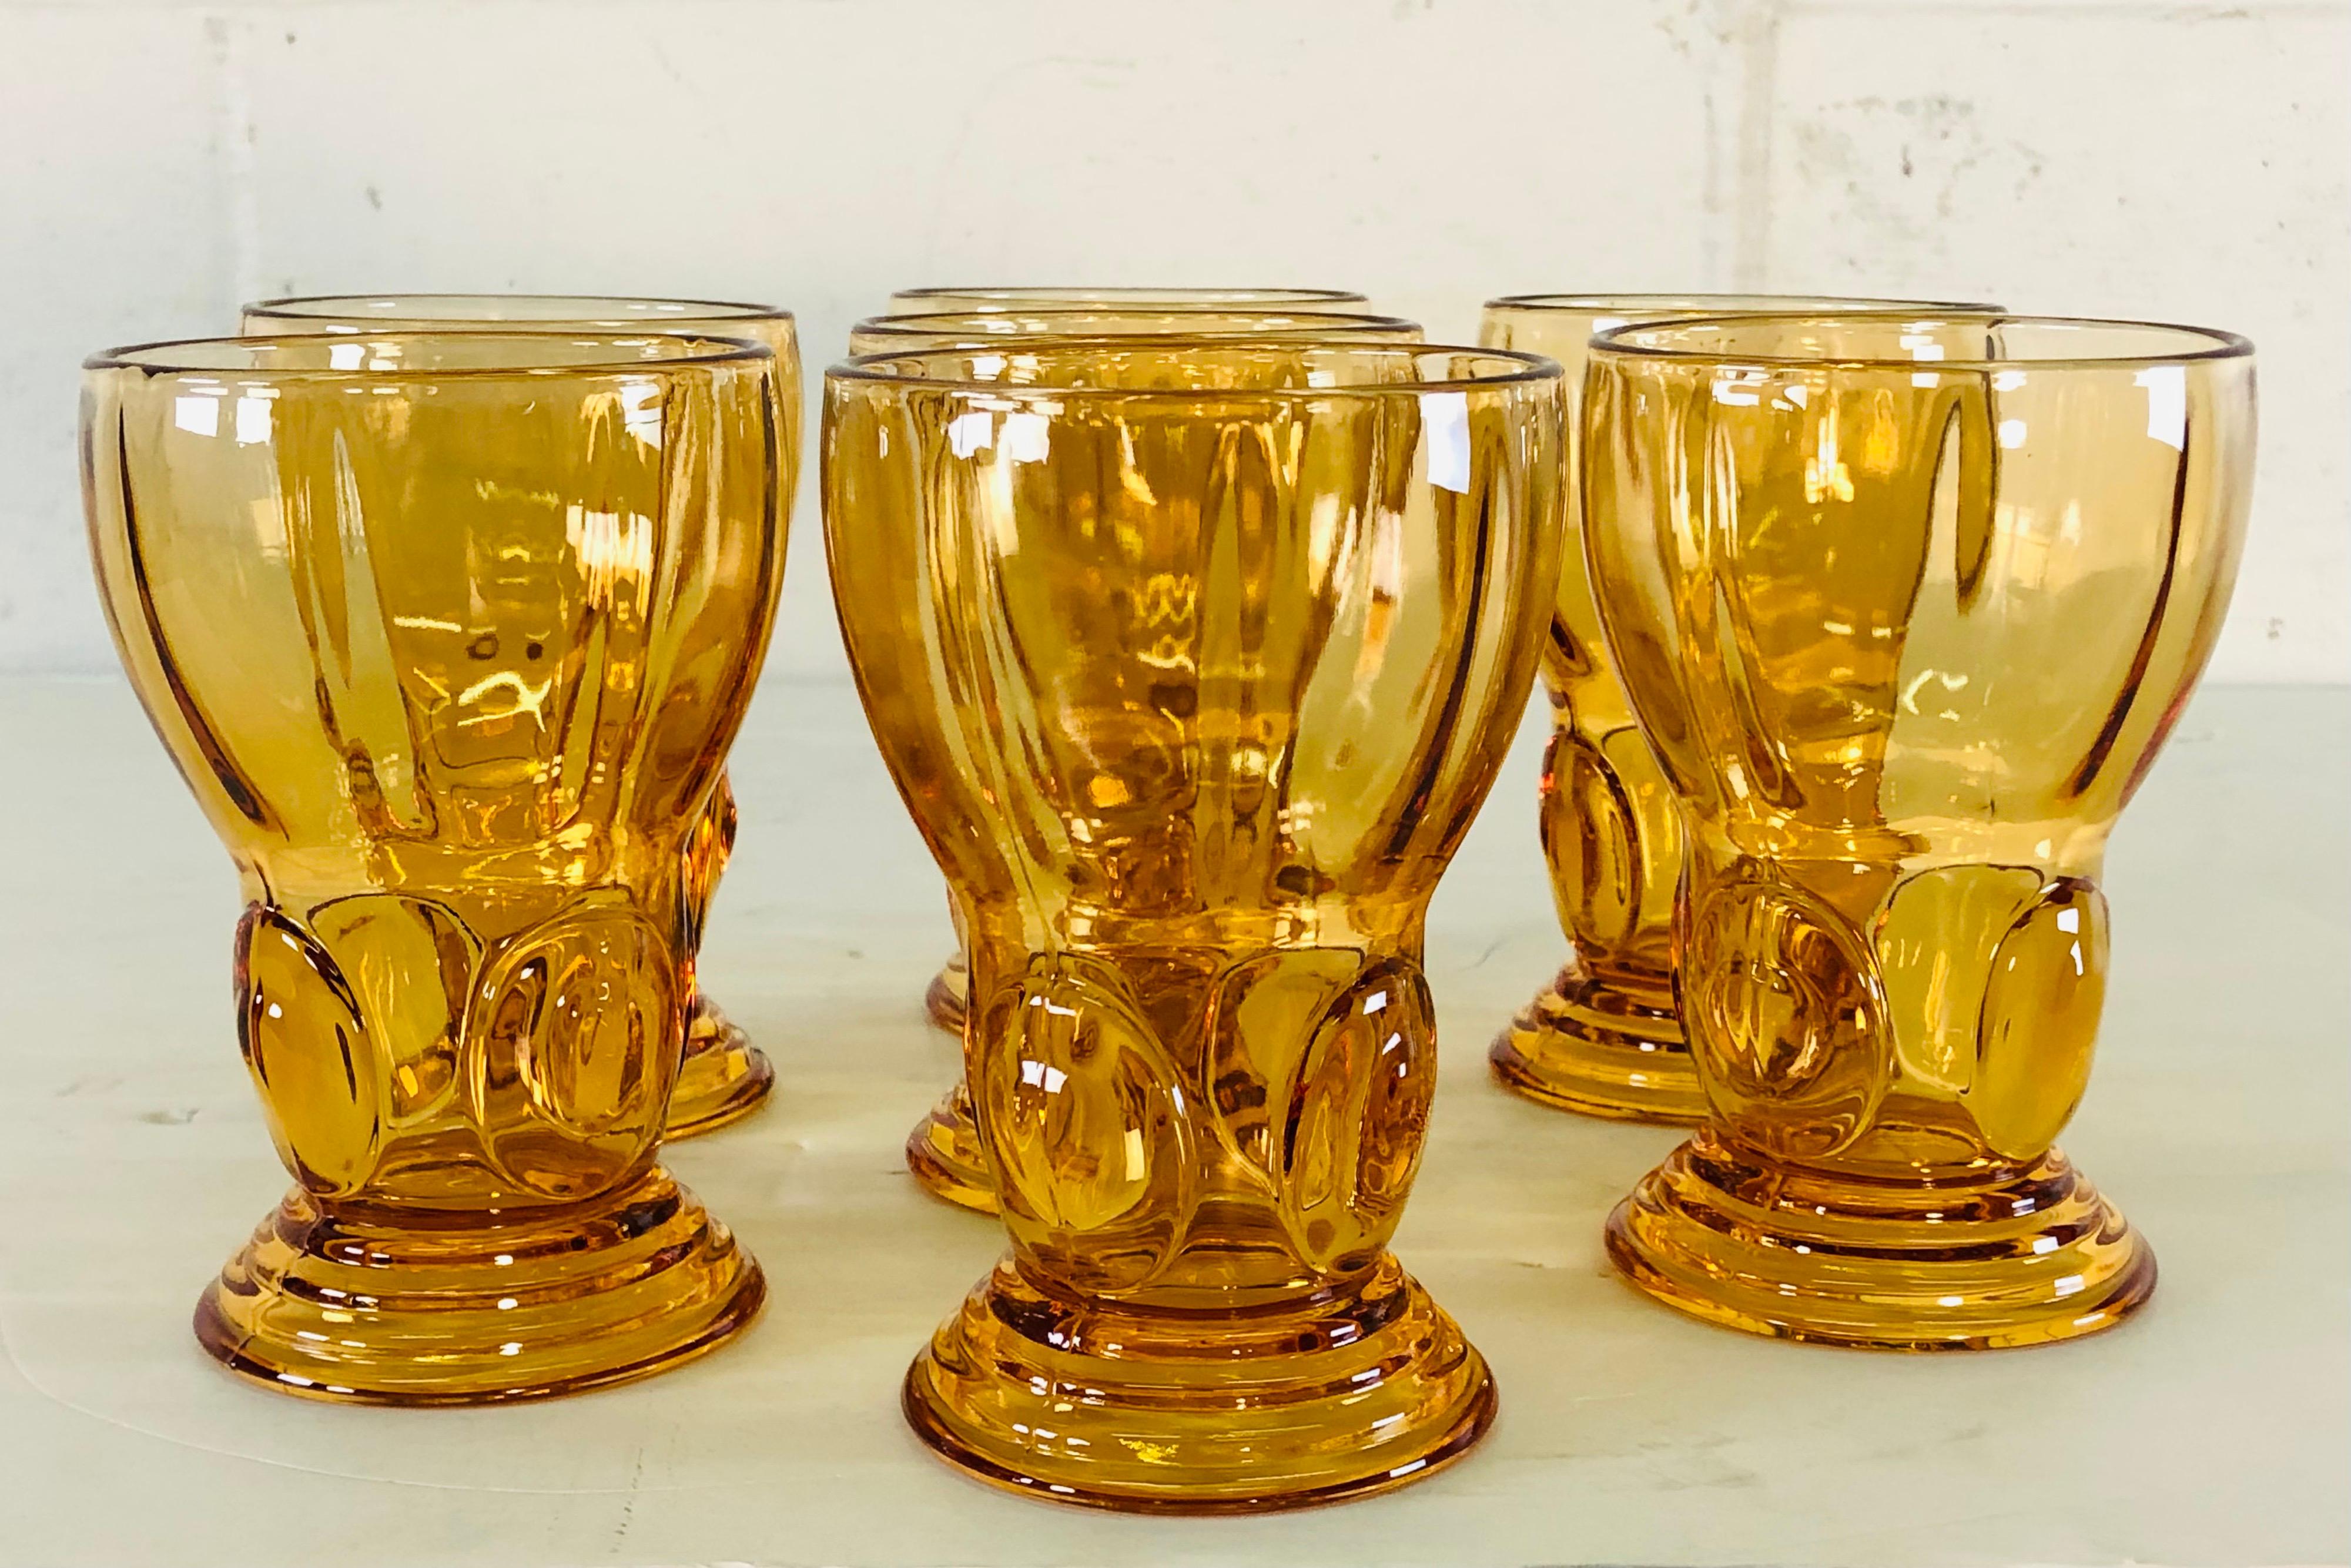 Vintage 1950s set of seven amber glass tall tumblers with drops of glass on the stems. Unmarked.